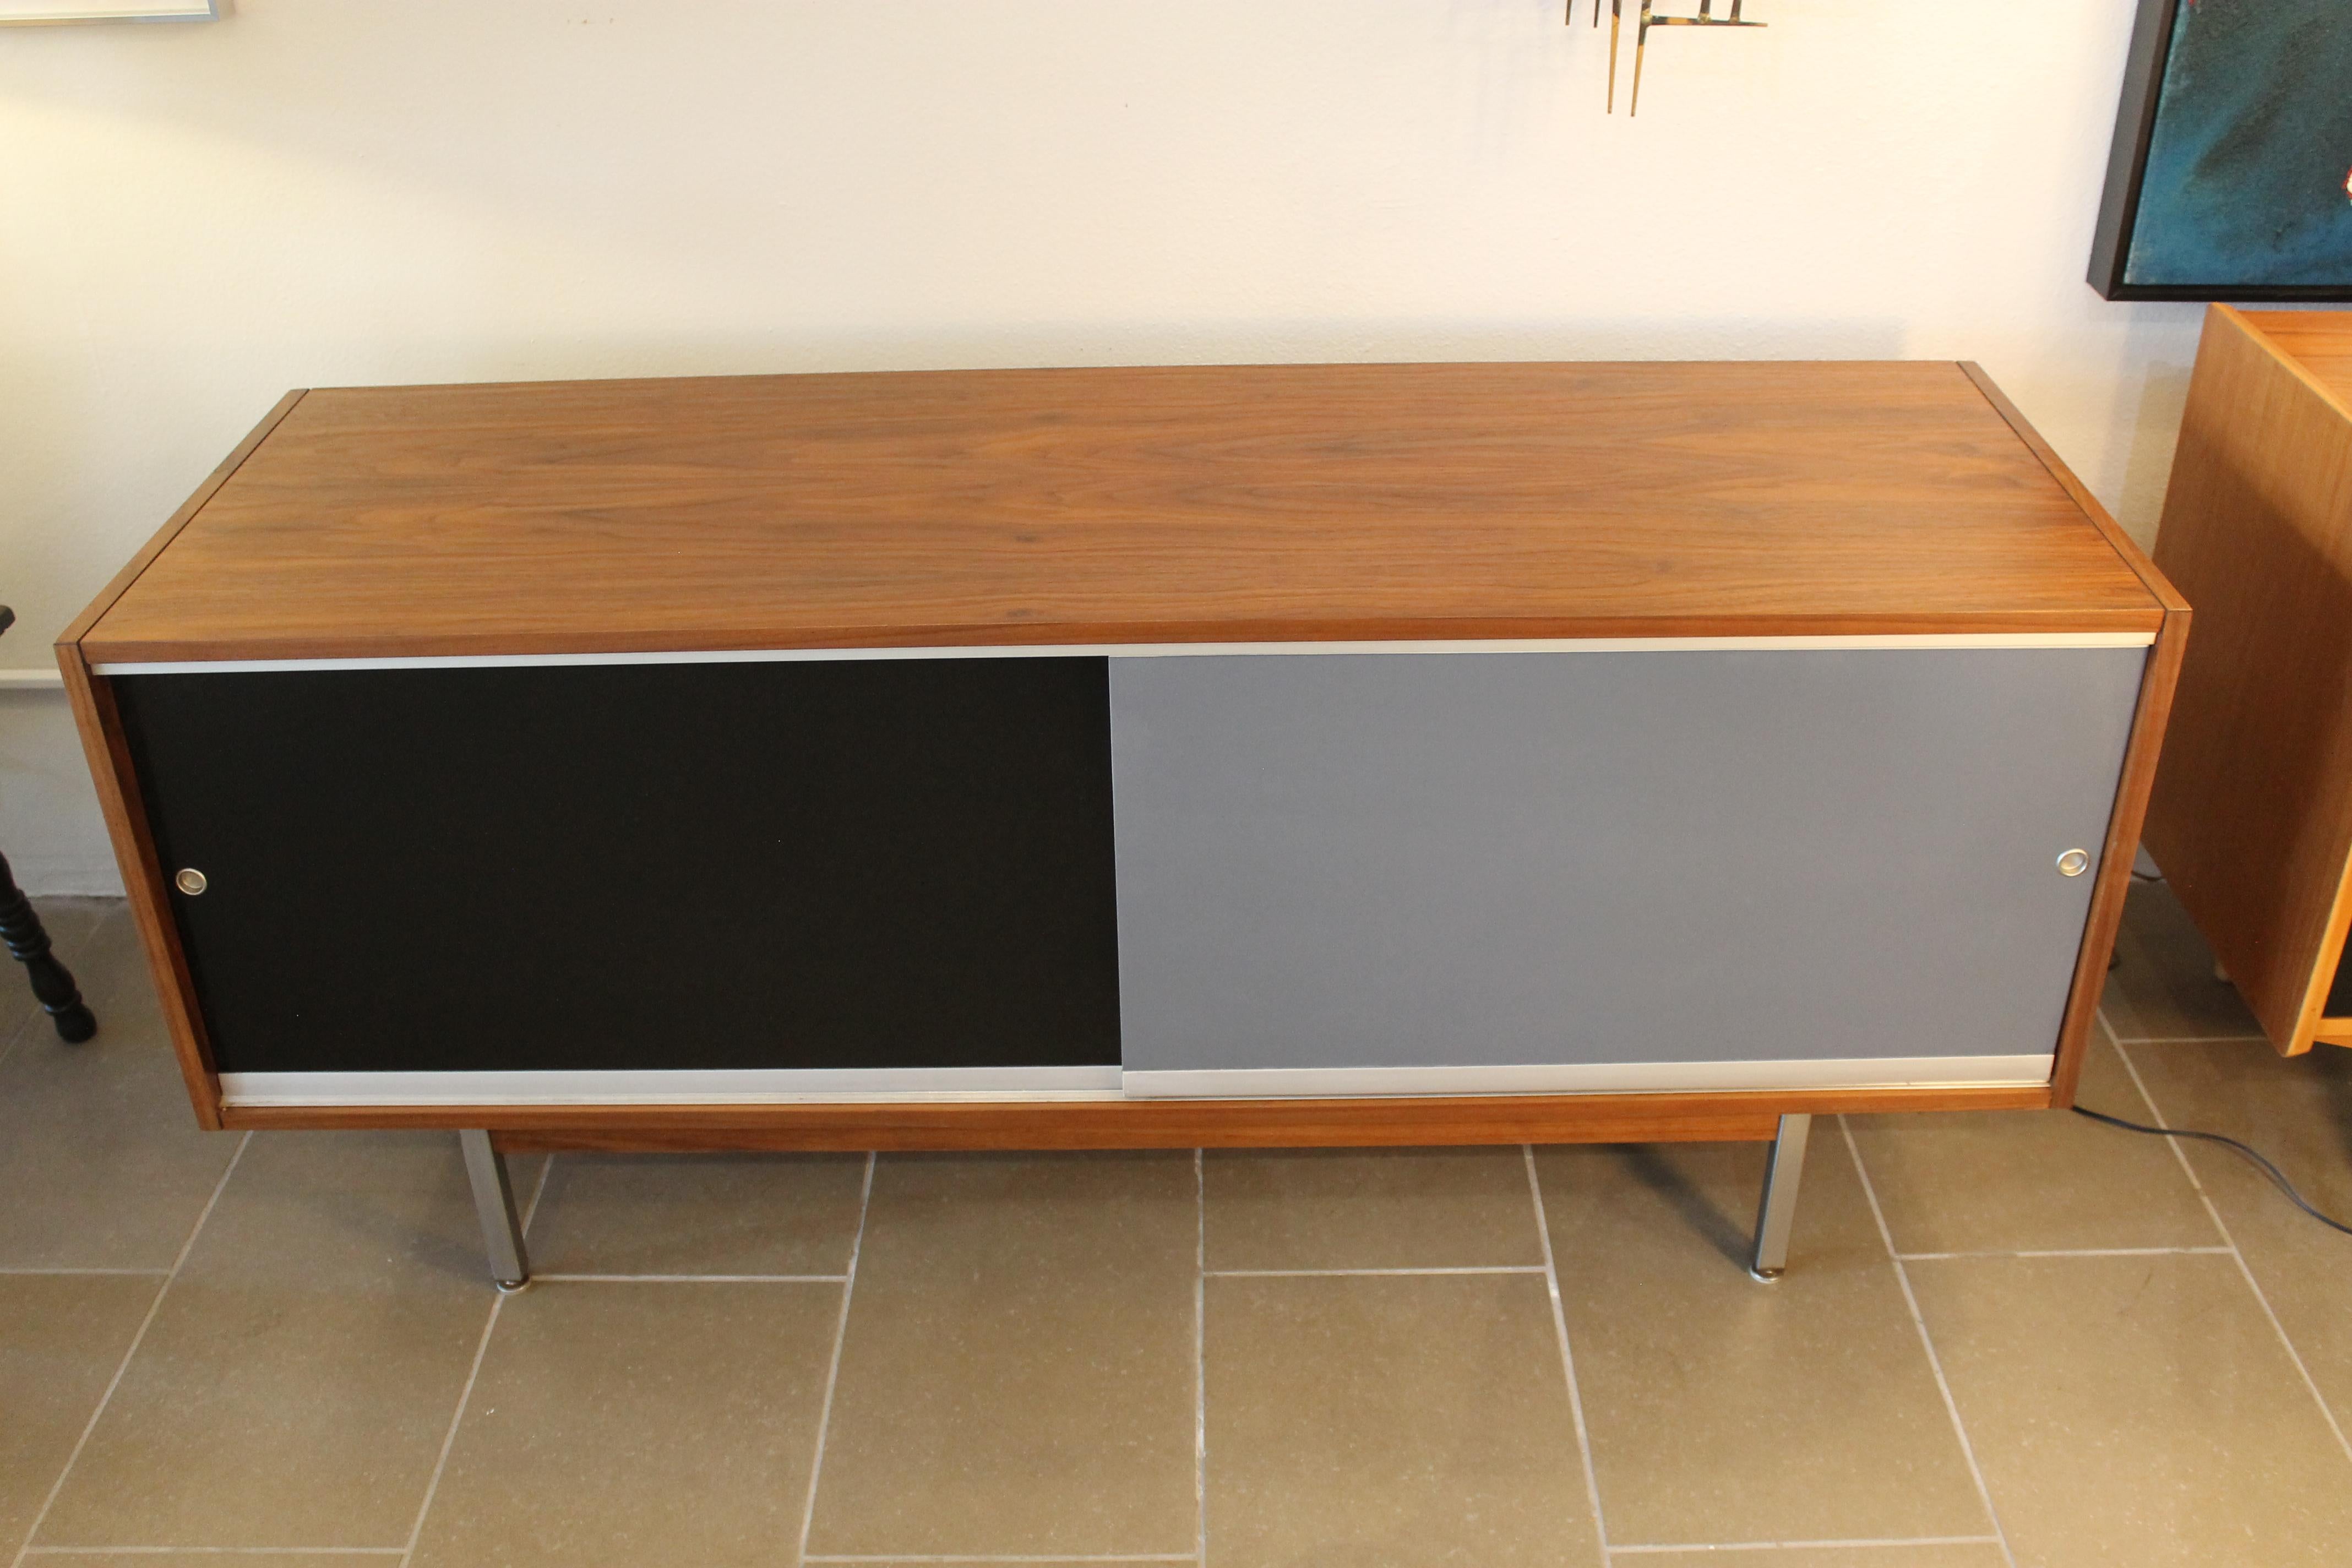 Credenza with black and grey sliders on steel legs. Reminiscent of George Nelson designs.  To the right of cabinet there are 2 drawers and a filing cabinet. The credenza measure 60.25